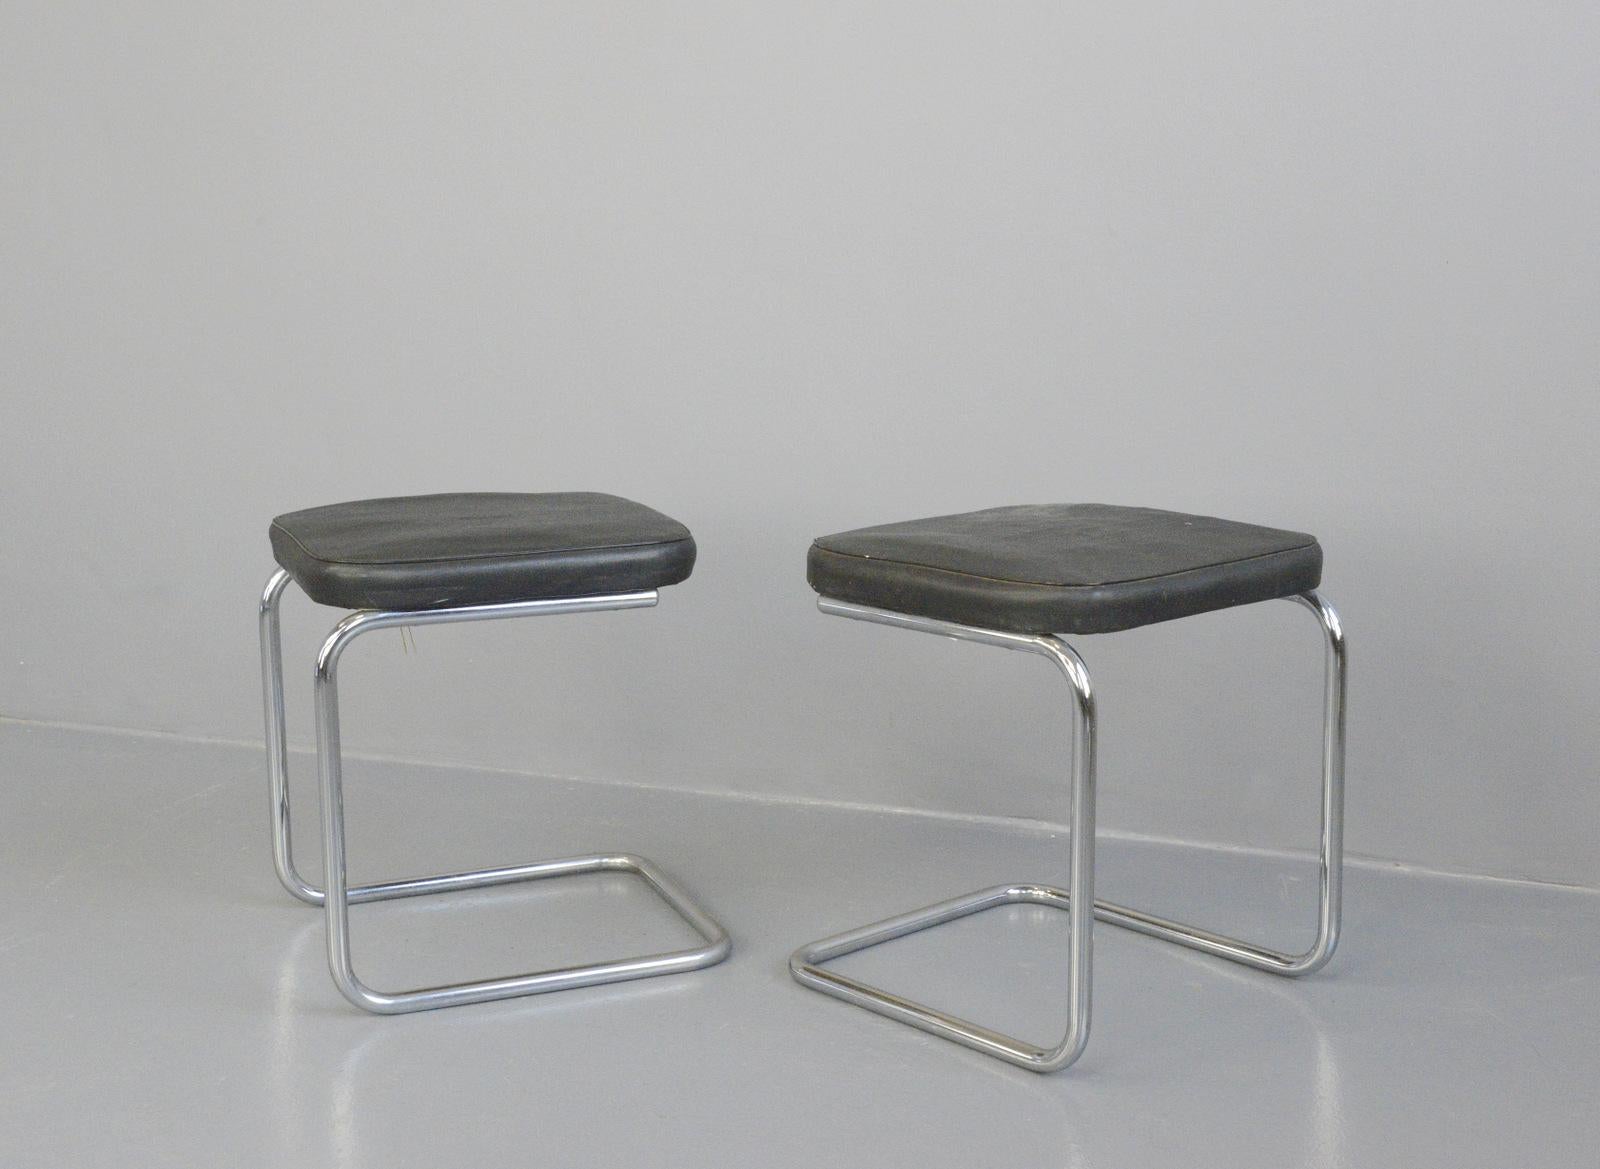 Bauhaus H22 stools by Mart Stam for Mauser, circa 1920s

- Price is per stool
- Chromed tubular steel frame
- Cantilever design with curved ply seat
- Designed by Mart Stam
- Produced by Mauser
- German ~ 1920s
- 42cm wide x 42cm deep x 47cm